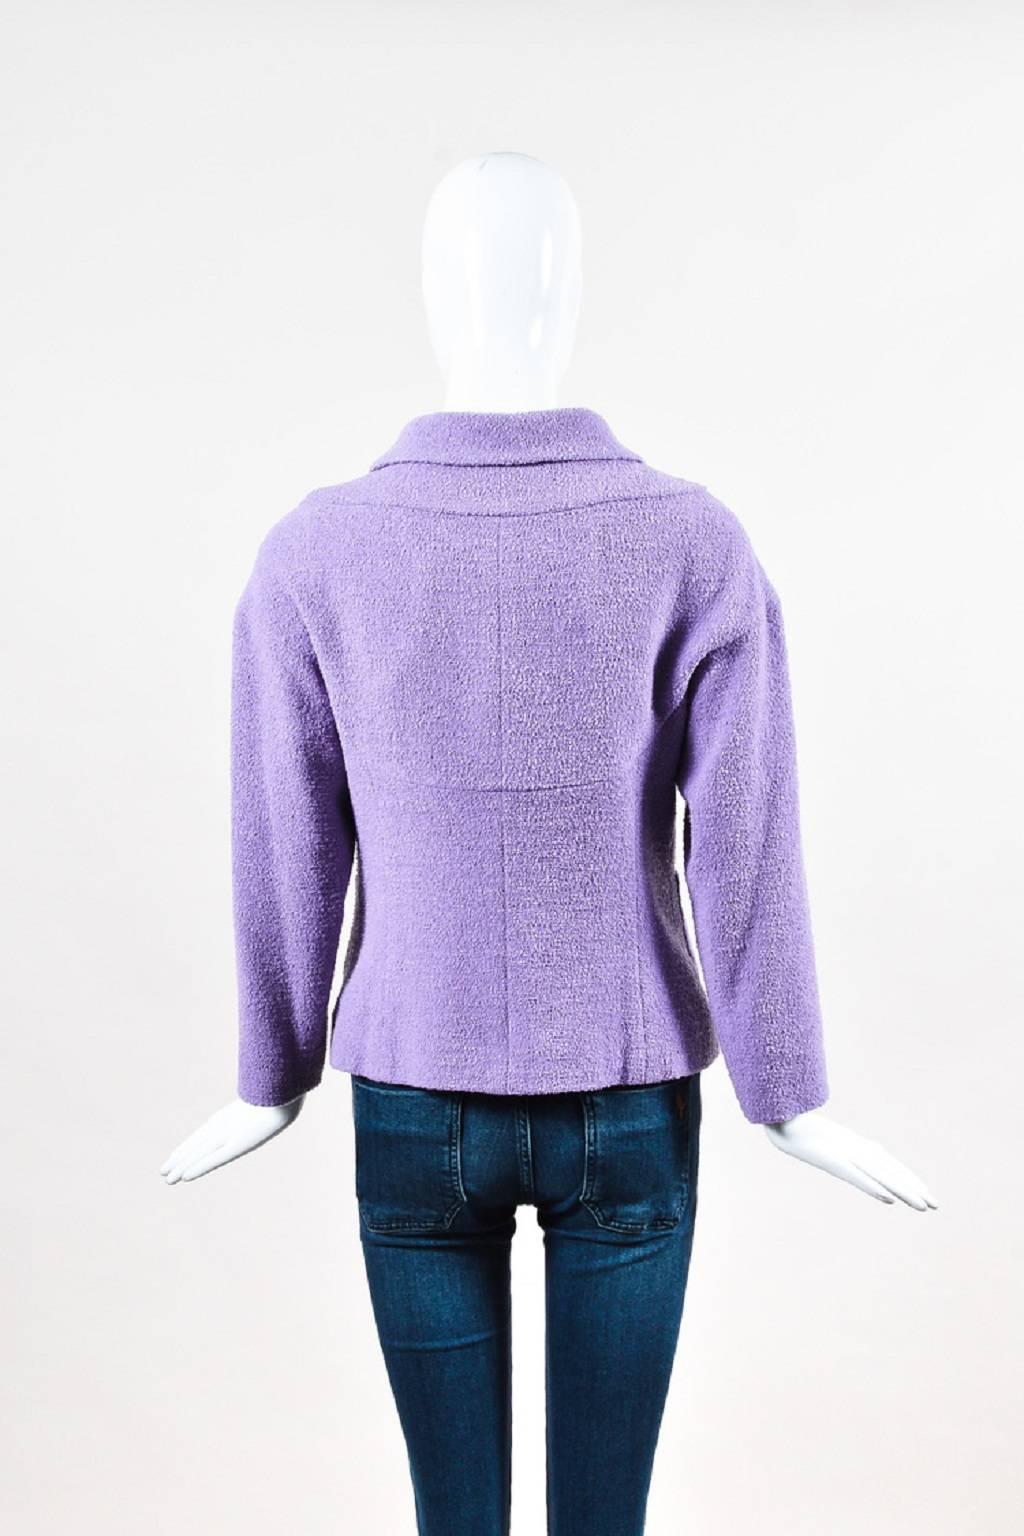 Chanel $4535 Lavender Purple Wool Boucle 'CC' Cabochon Button Jacket SZ 40 In Good Condition For Sale In Chicago, IL